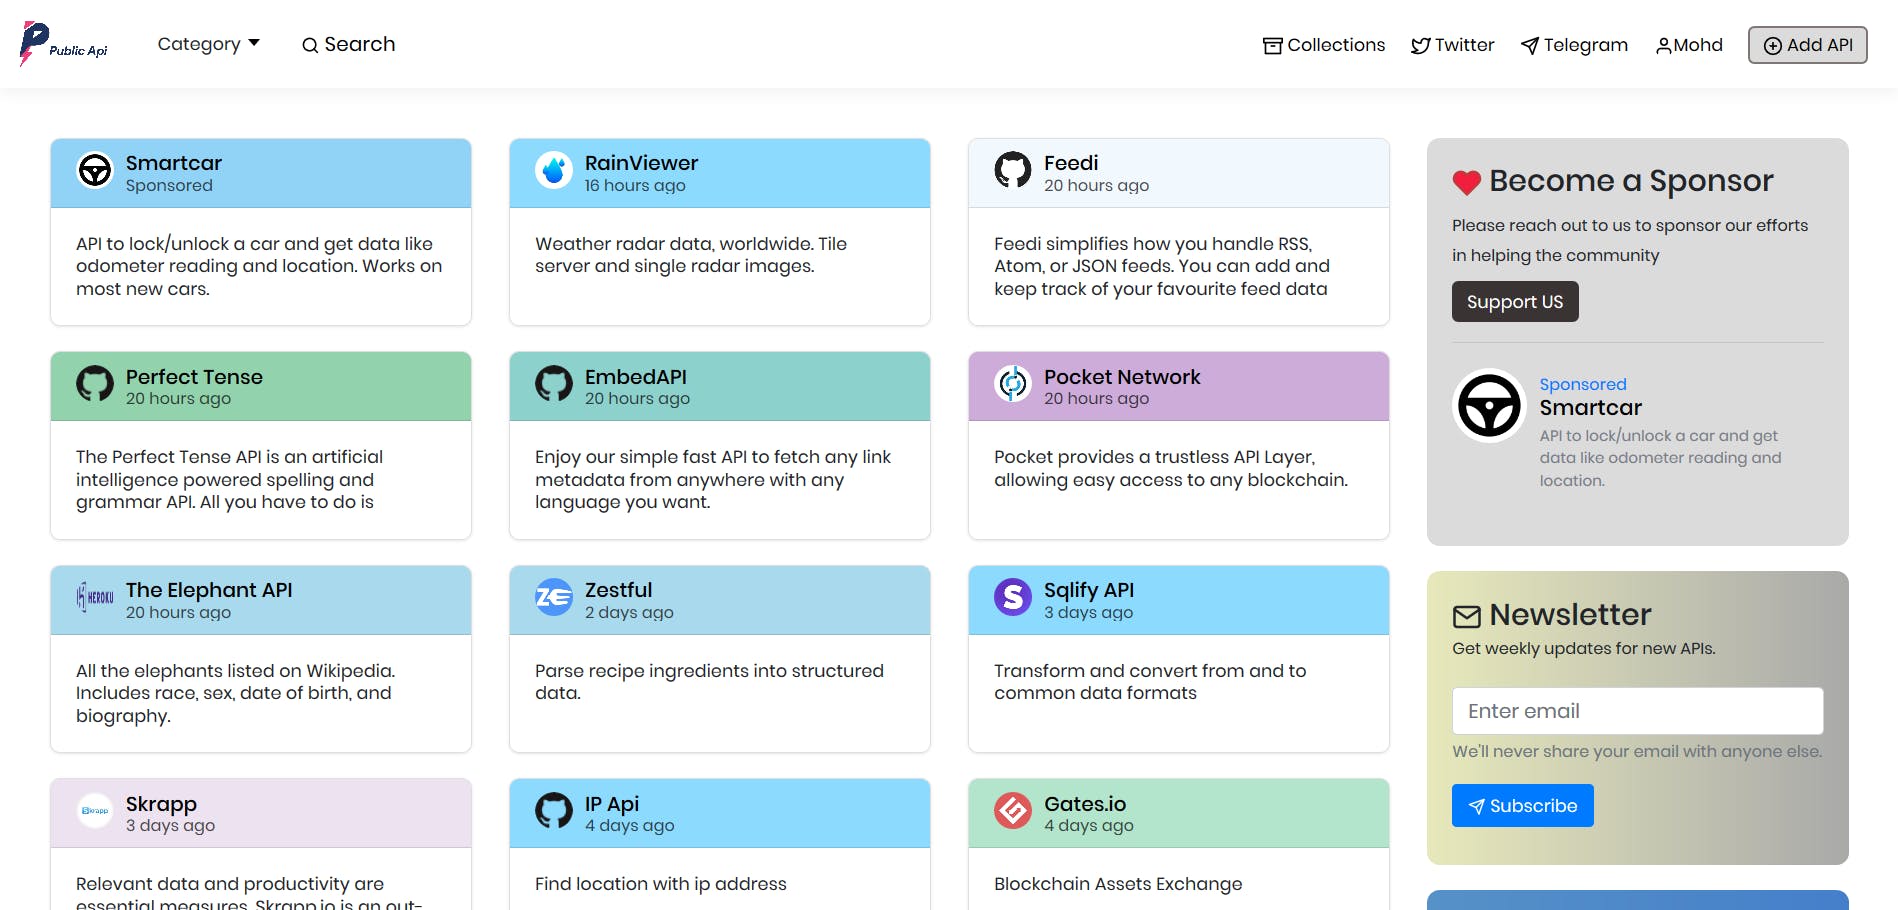 Screenshot_2019-06-15 Public APIs A Collective Index of Public and Free APIs for Software Development.png